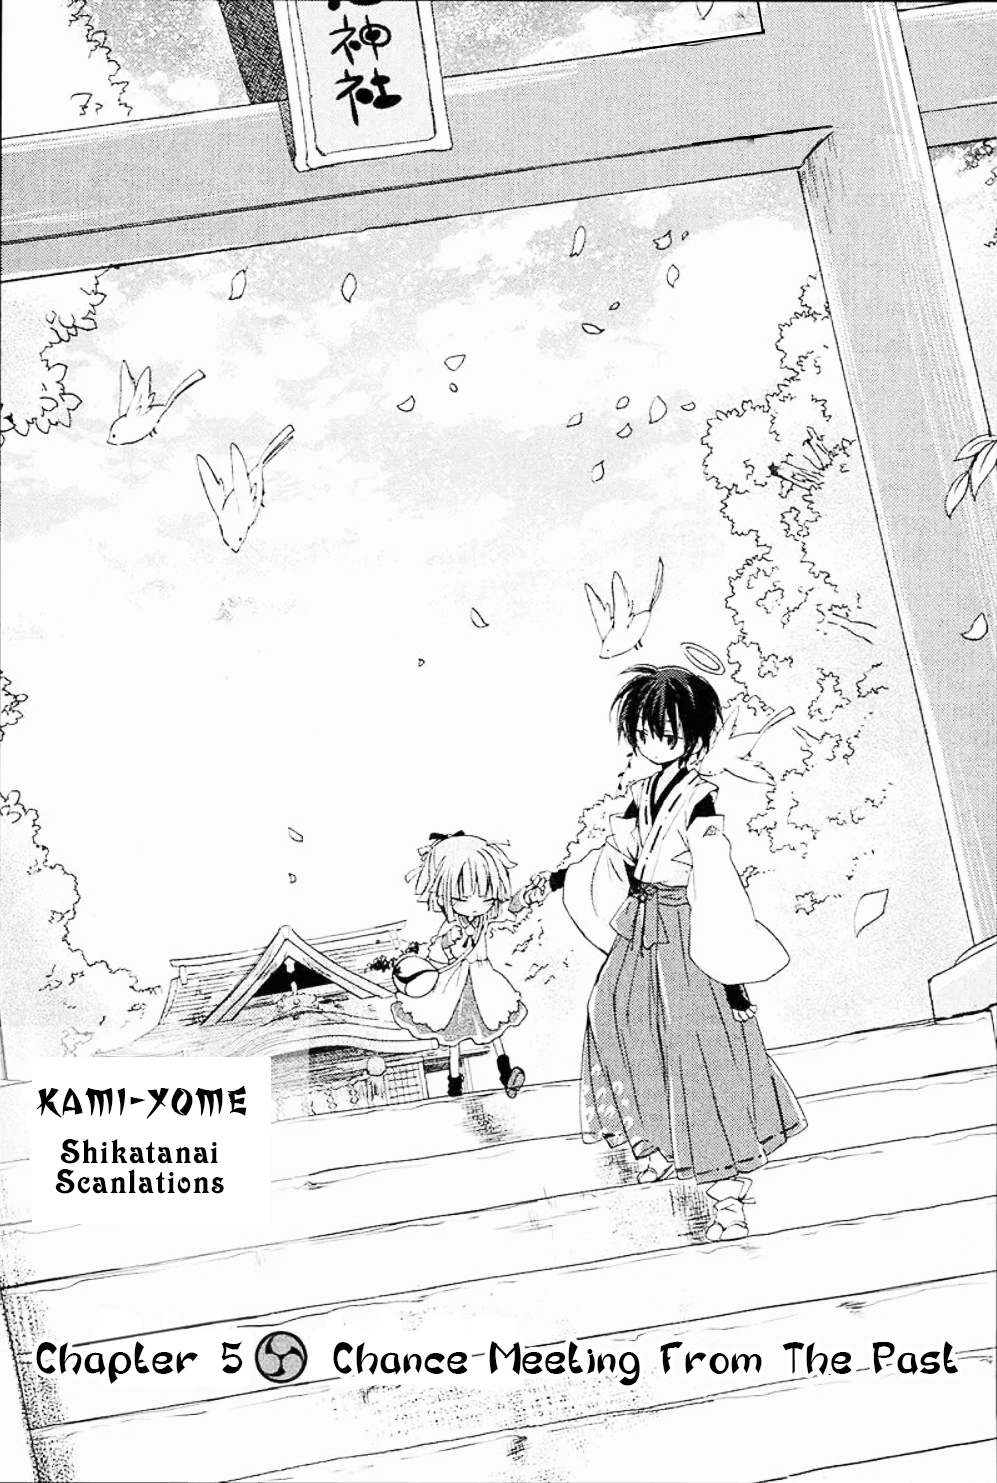 Kami Yome Vol. 1 Ch. 5 Chance Meeting From the Past